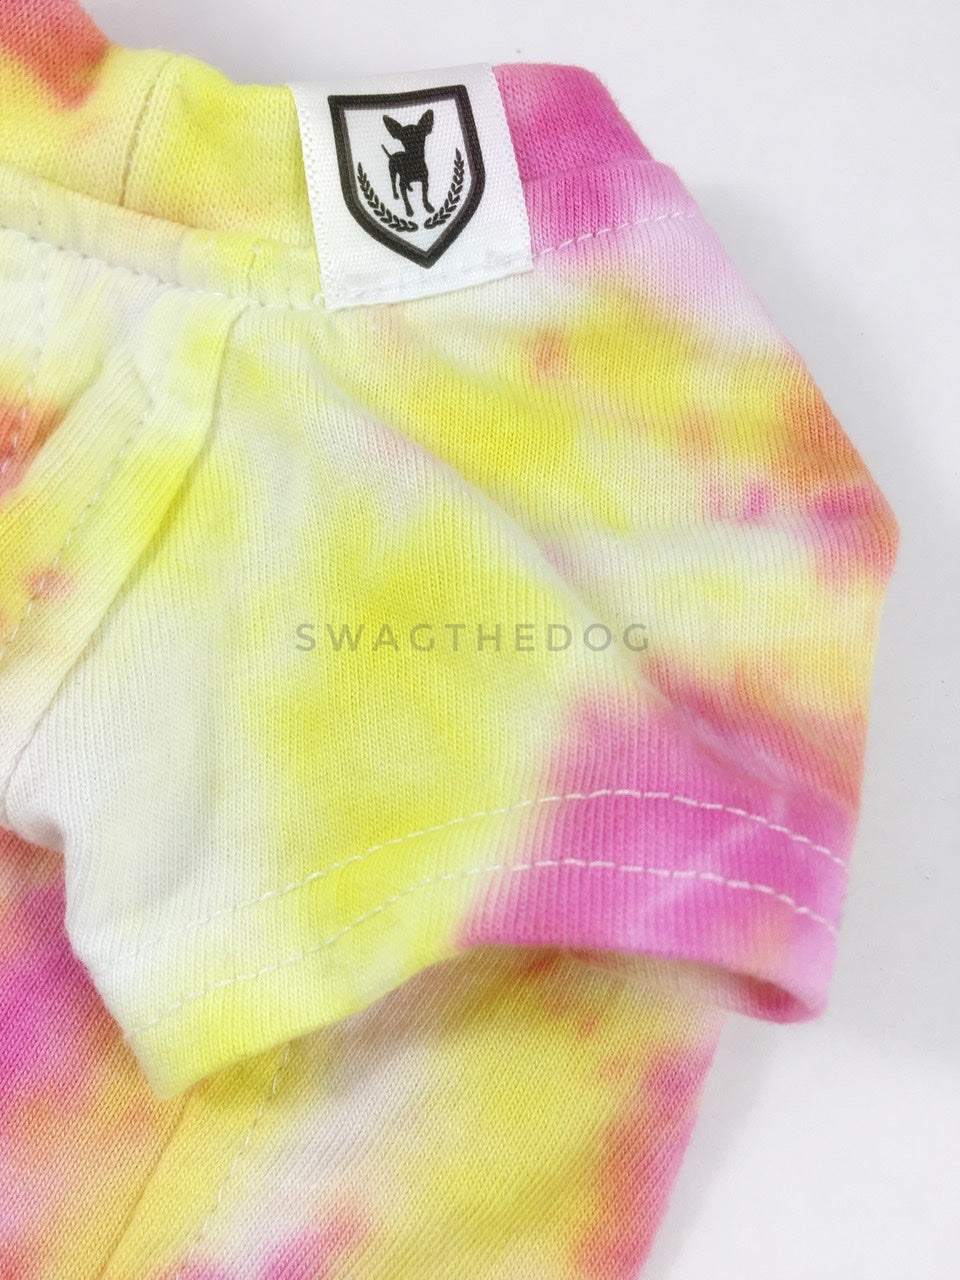 Swagadelic Cotton Candy Tie Dye Tee - Close-up of product front view. The hand tie-dyed tee with Pink and Yellow